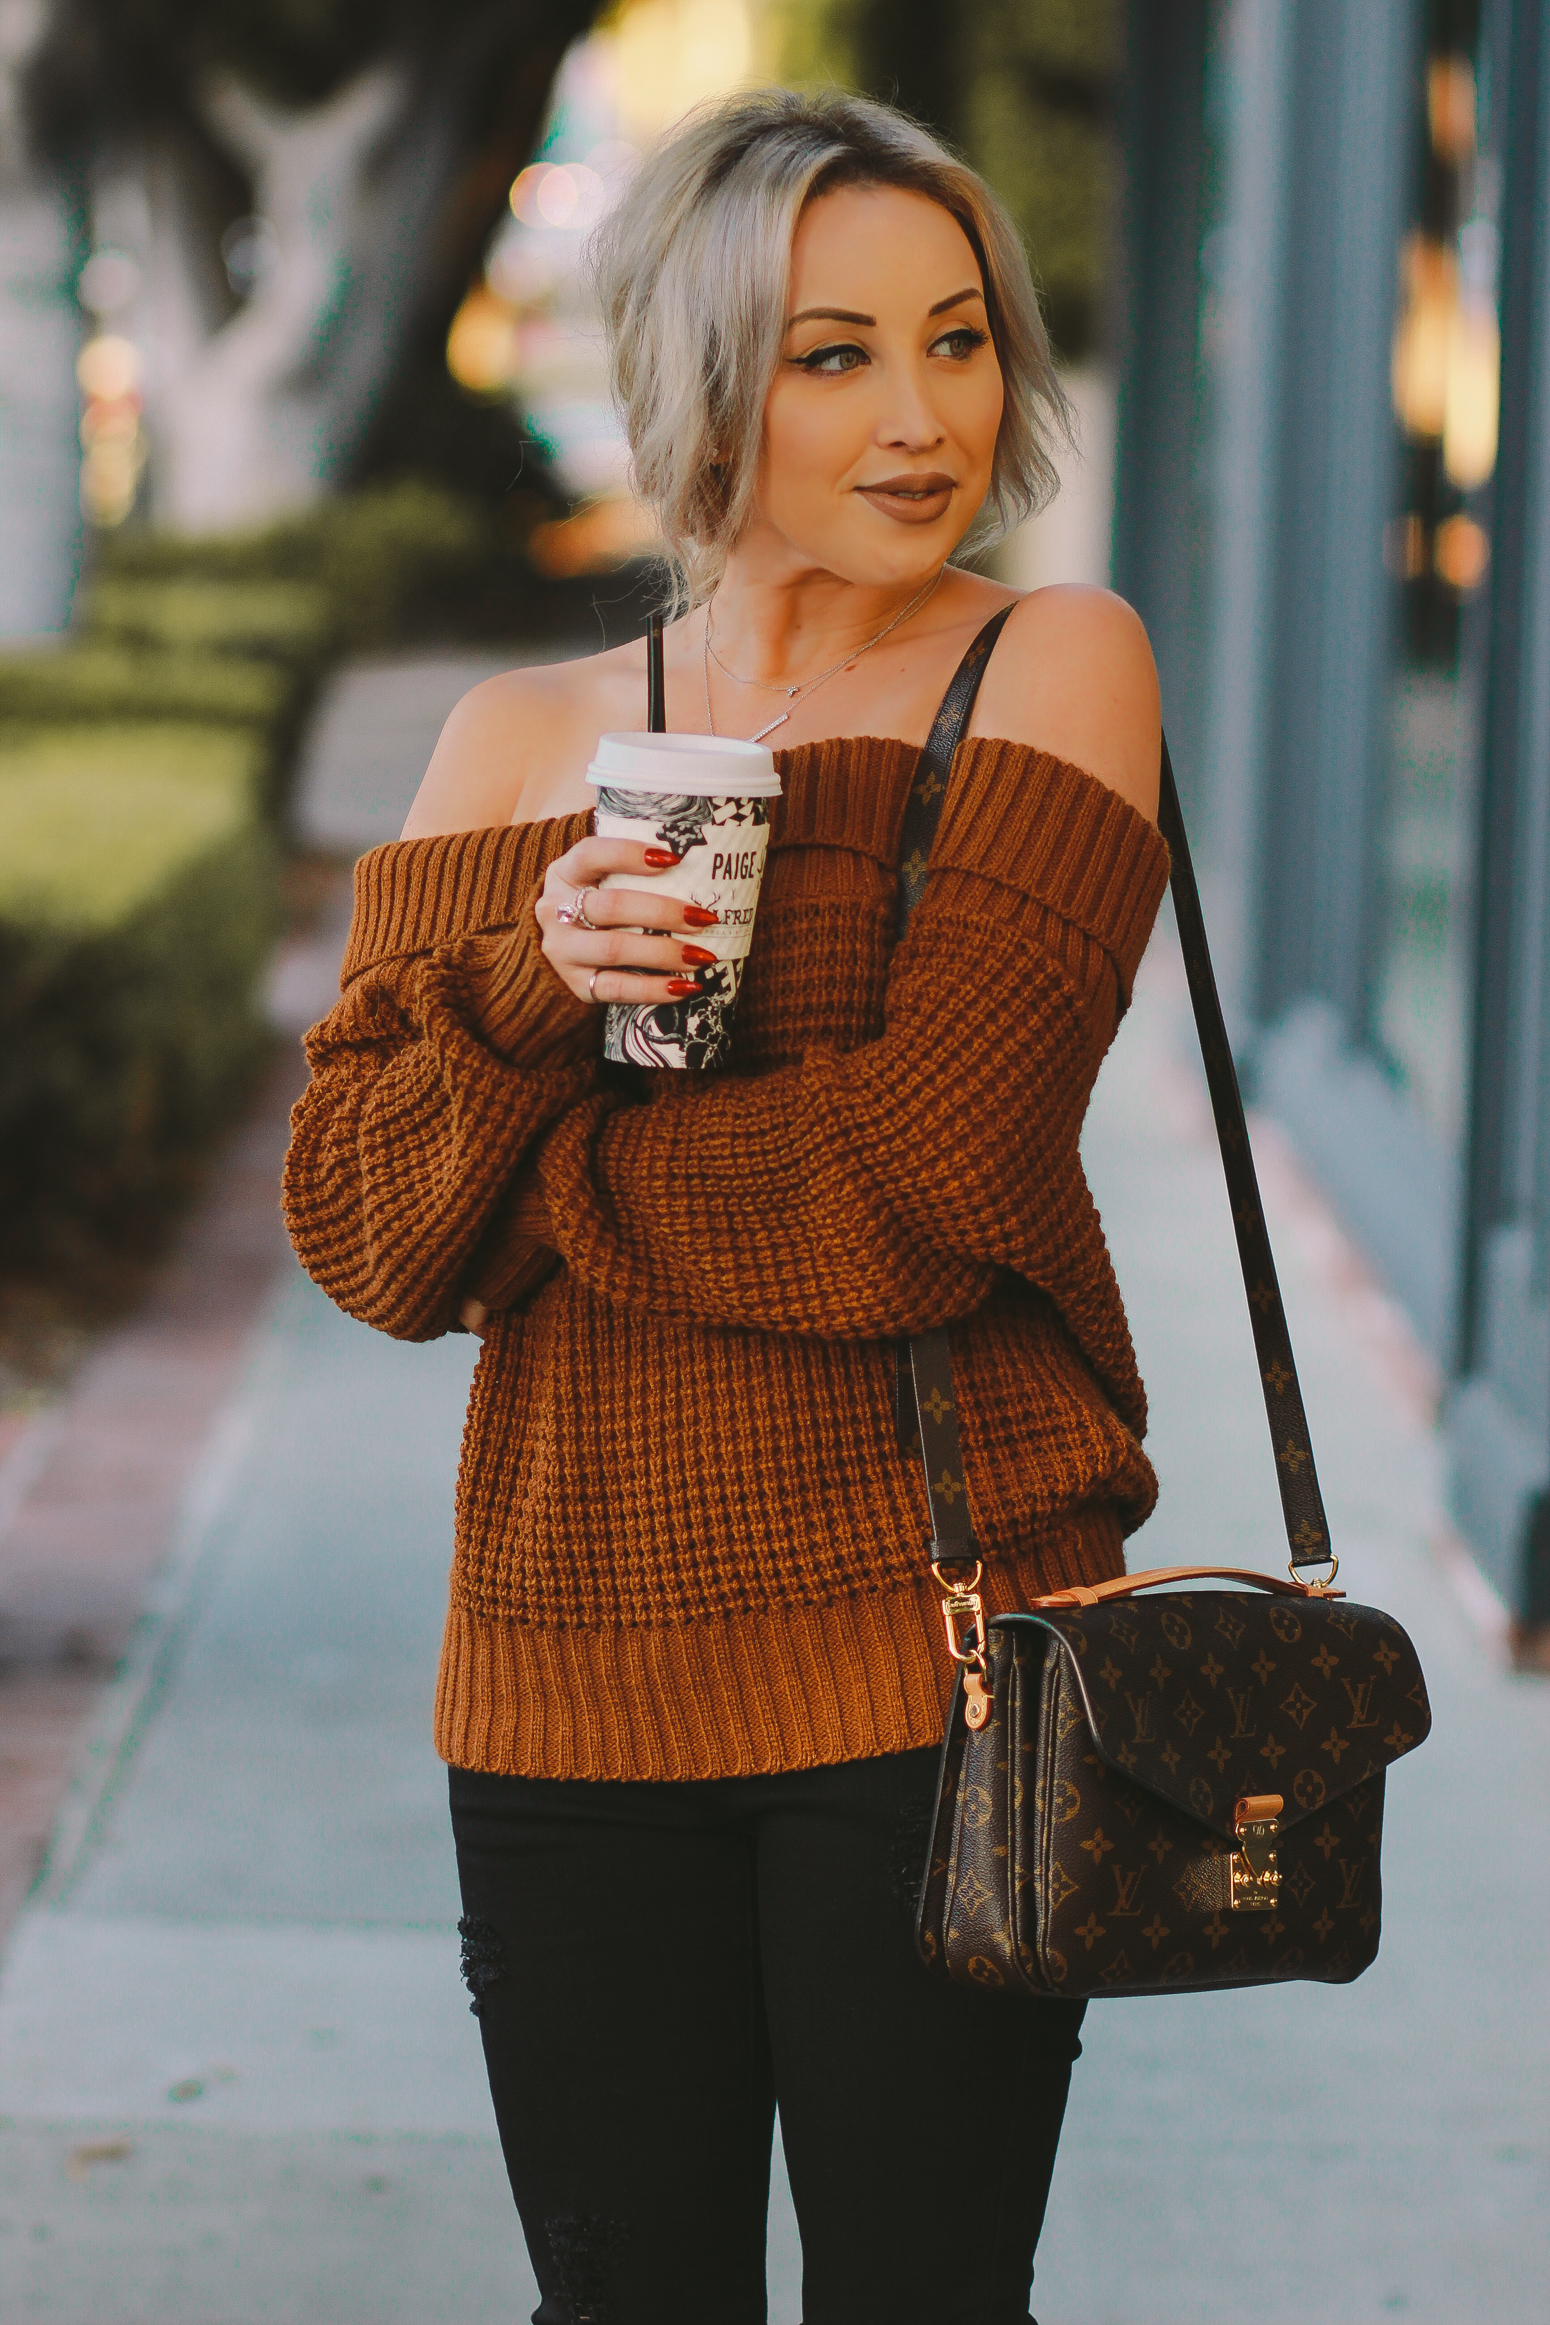 Blondie in the City | Comfy Nordstrom Sweater